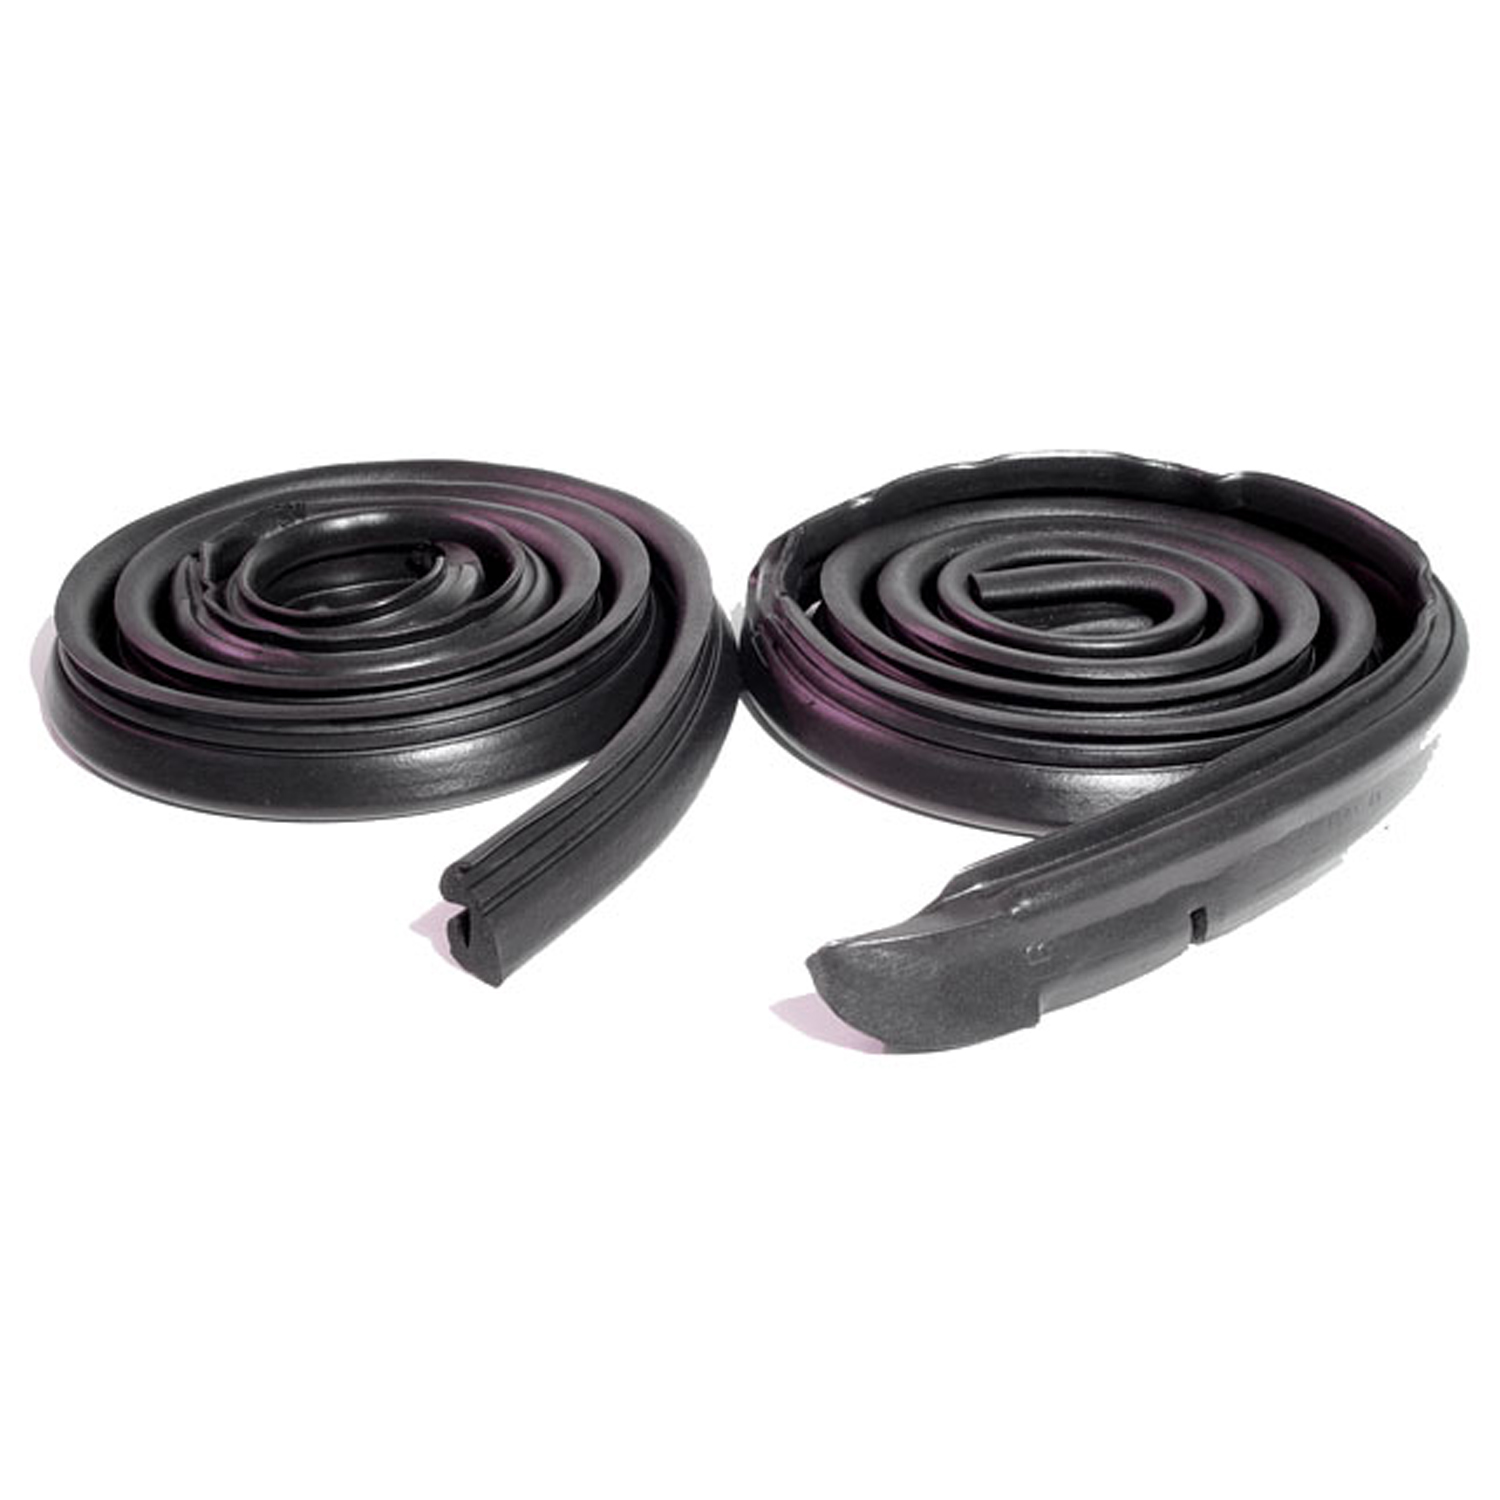 1967 Dodge Polara Molded Roof Rail Seals, for 2-Door Hardtop without Post-RR 4001-C